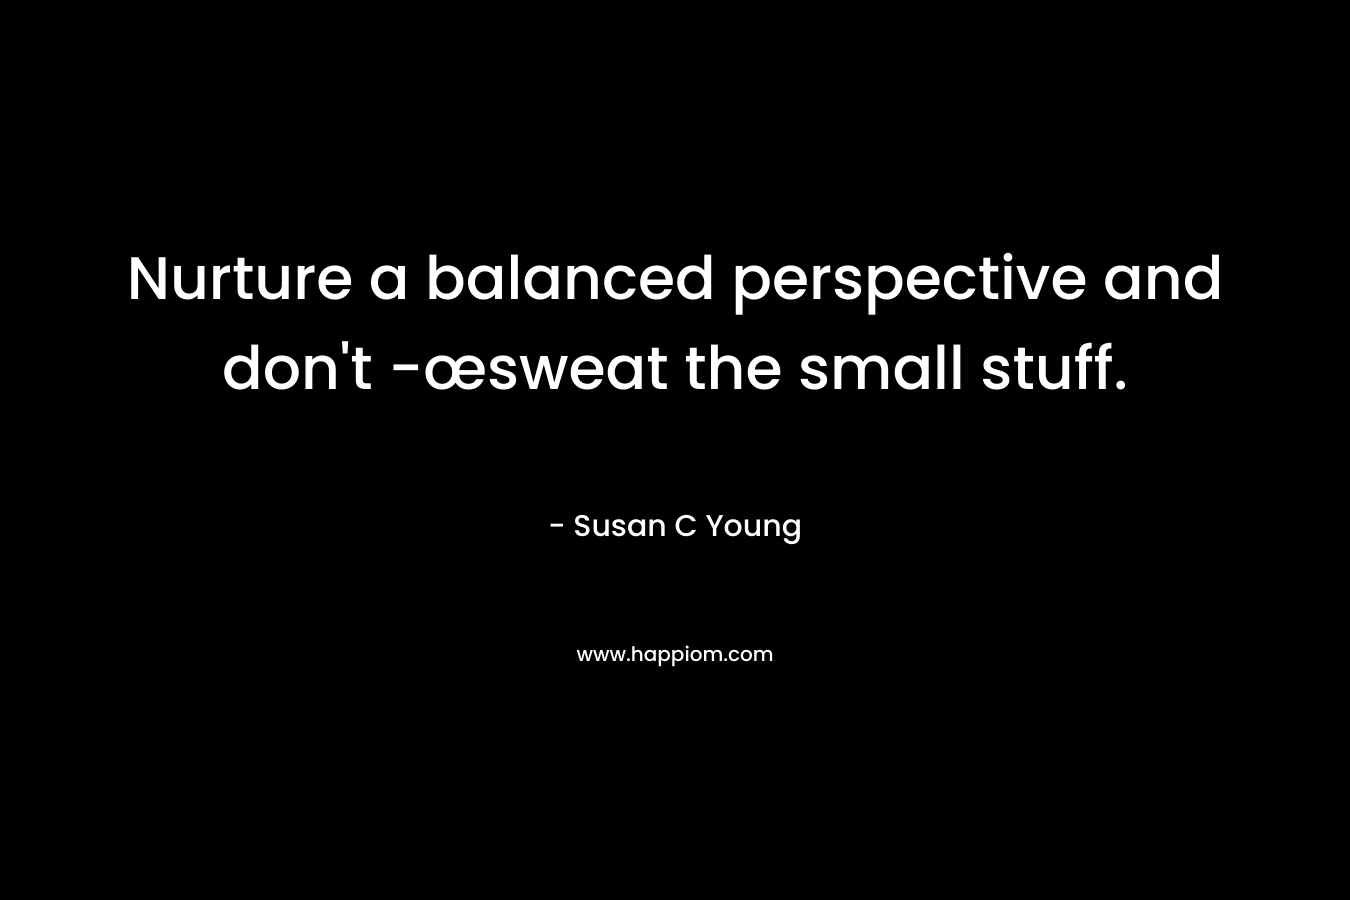 Nurture a balanced perspective and don't -œsweat the small stuff.